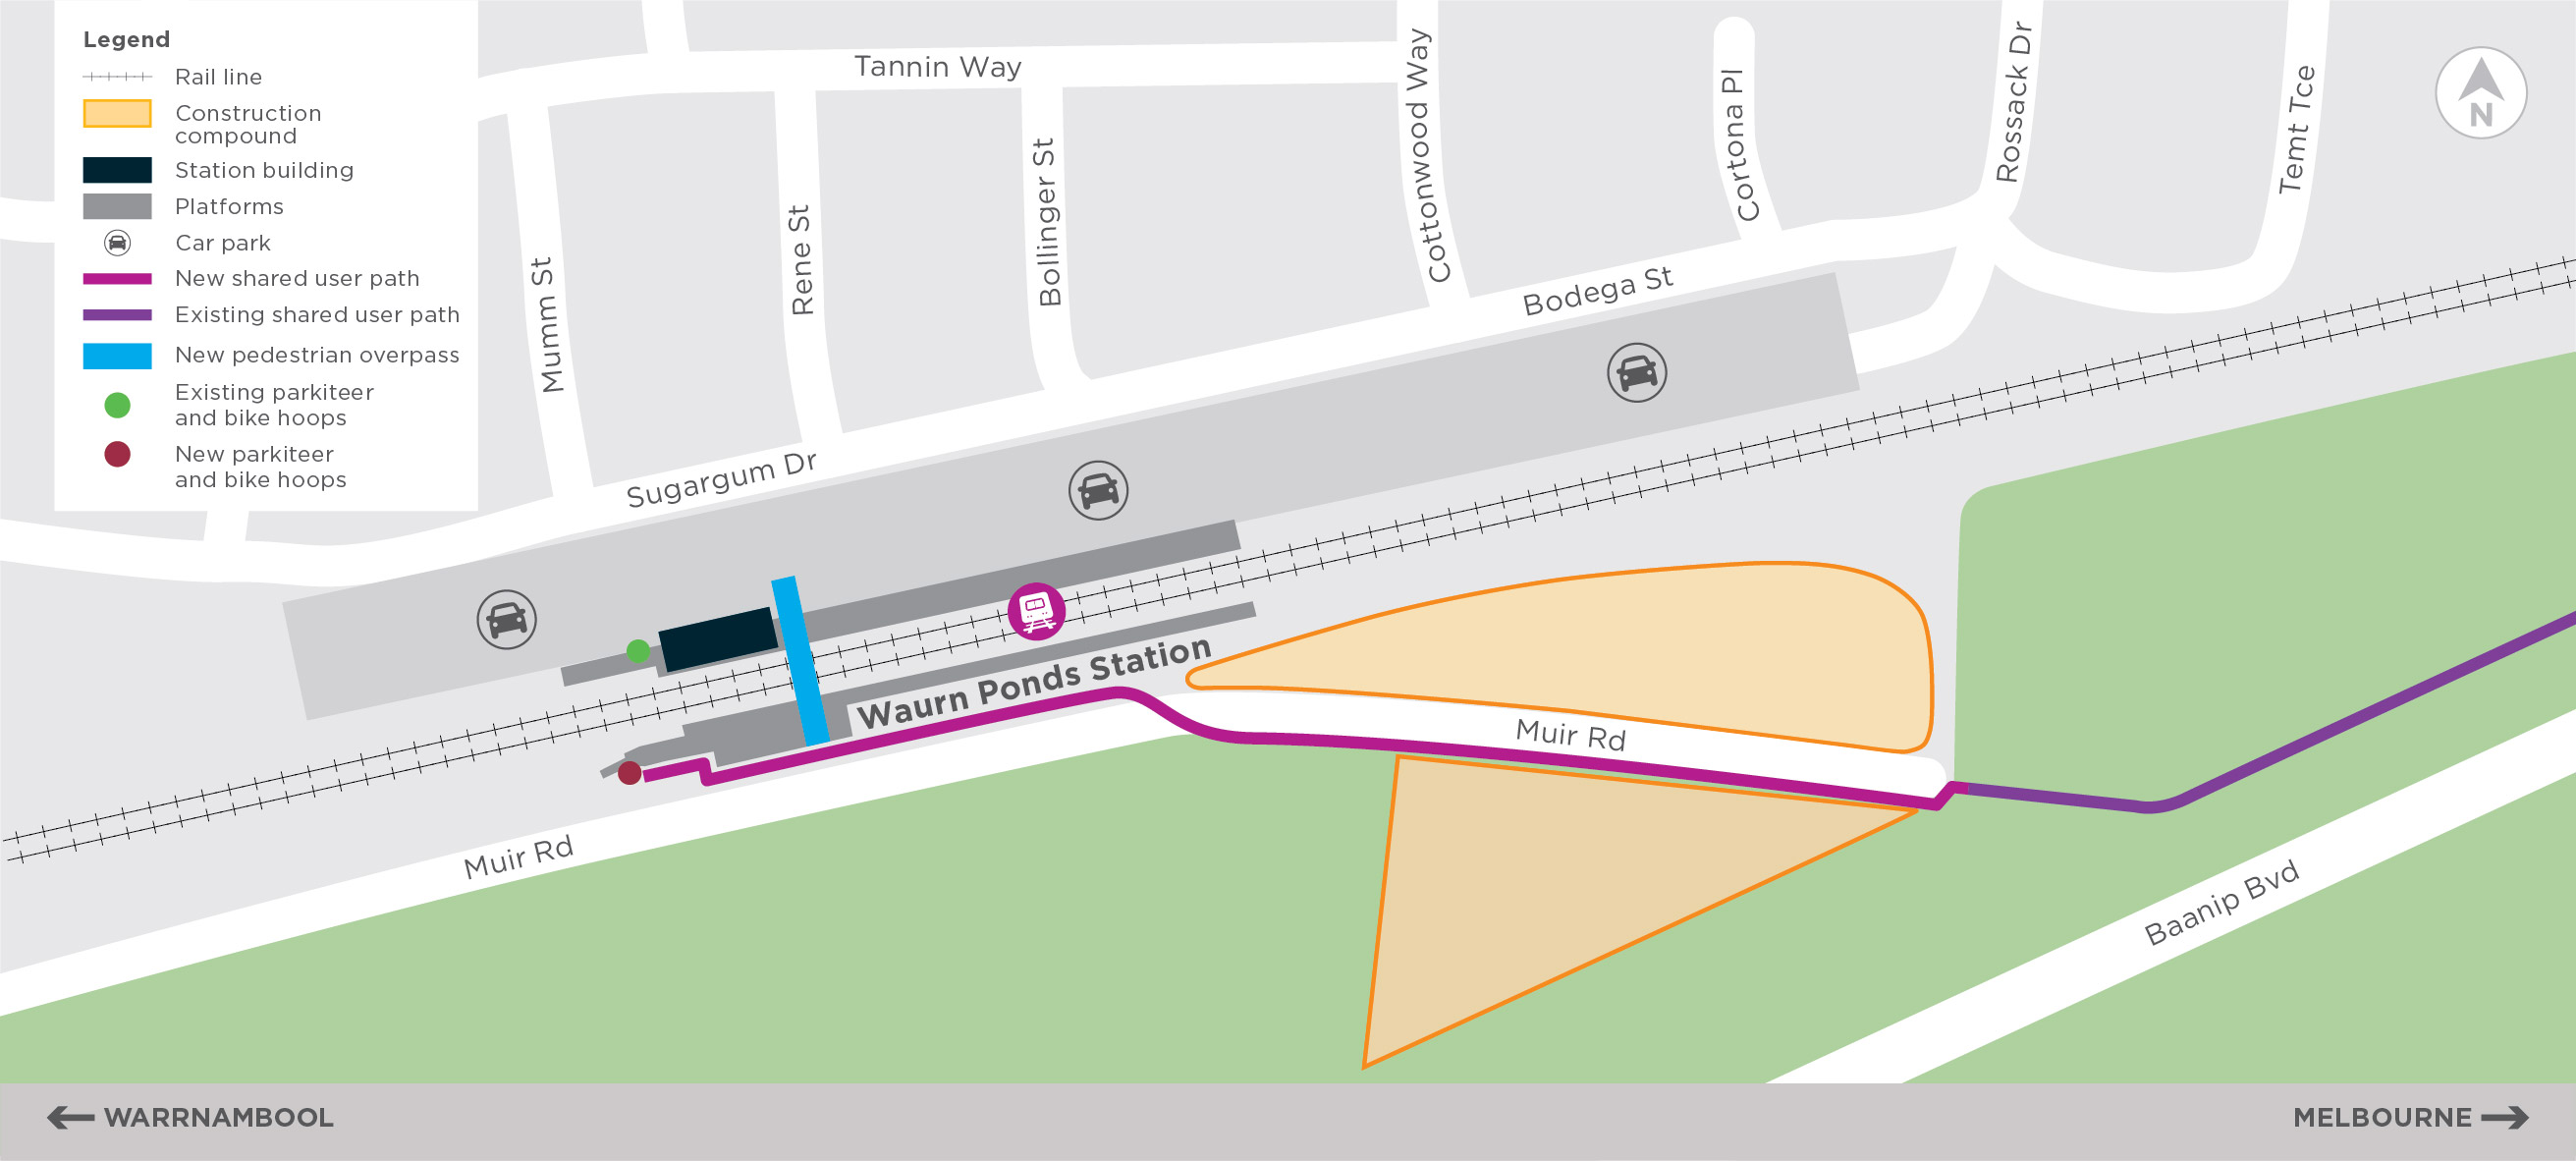 The new shared user path connects starts at the existing shared user path that runs parallel to Baanip Bvd. It runs along the southside of Muir Road and cross over close to the west end of the station. The shared user path continues to the west end of the station platform at the new parkiteer and bike hoops.